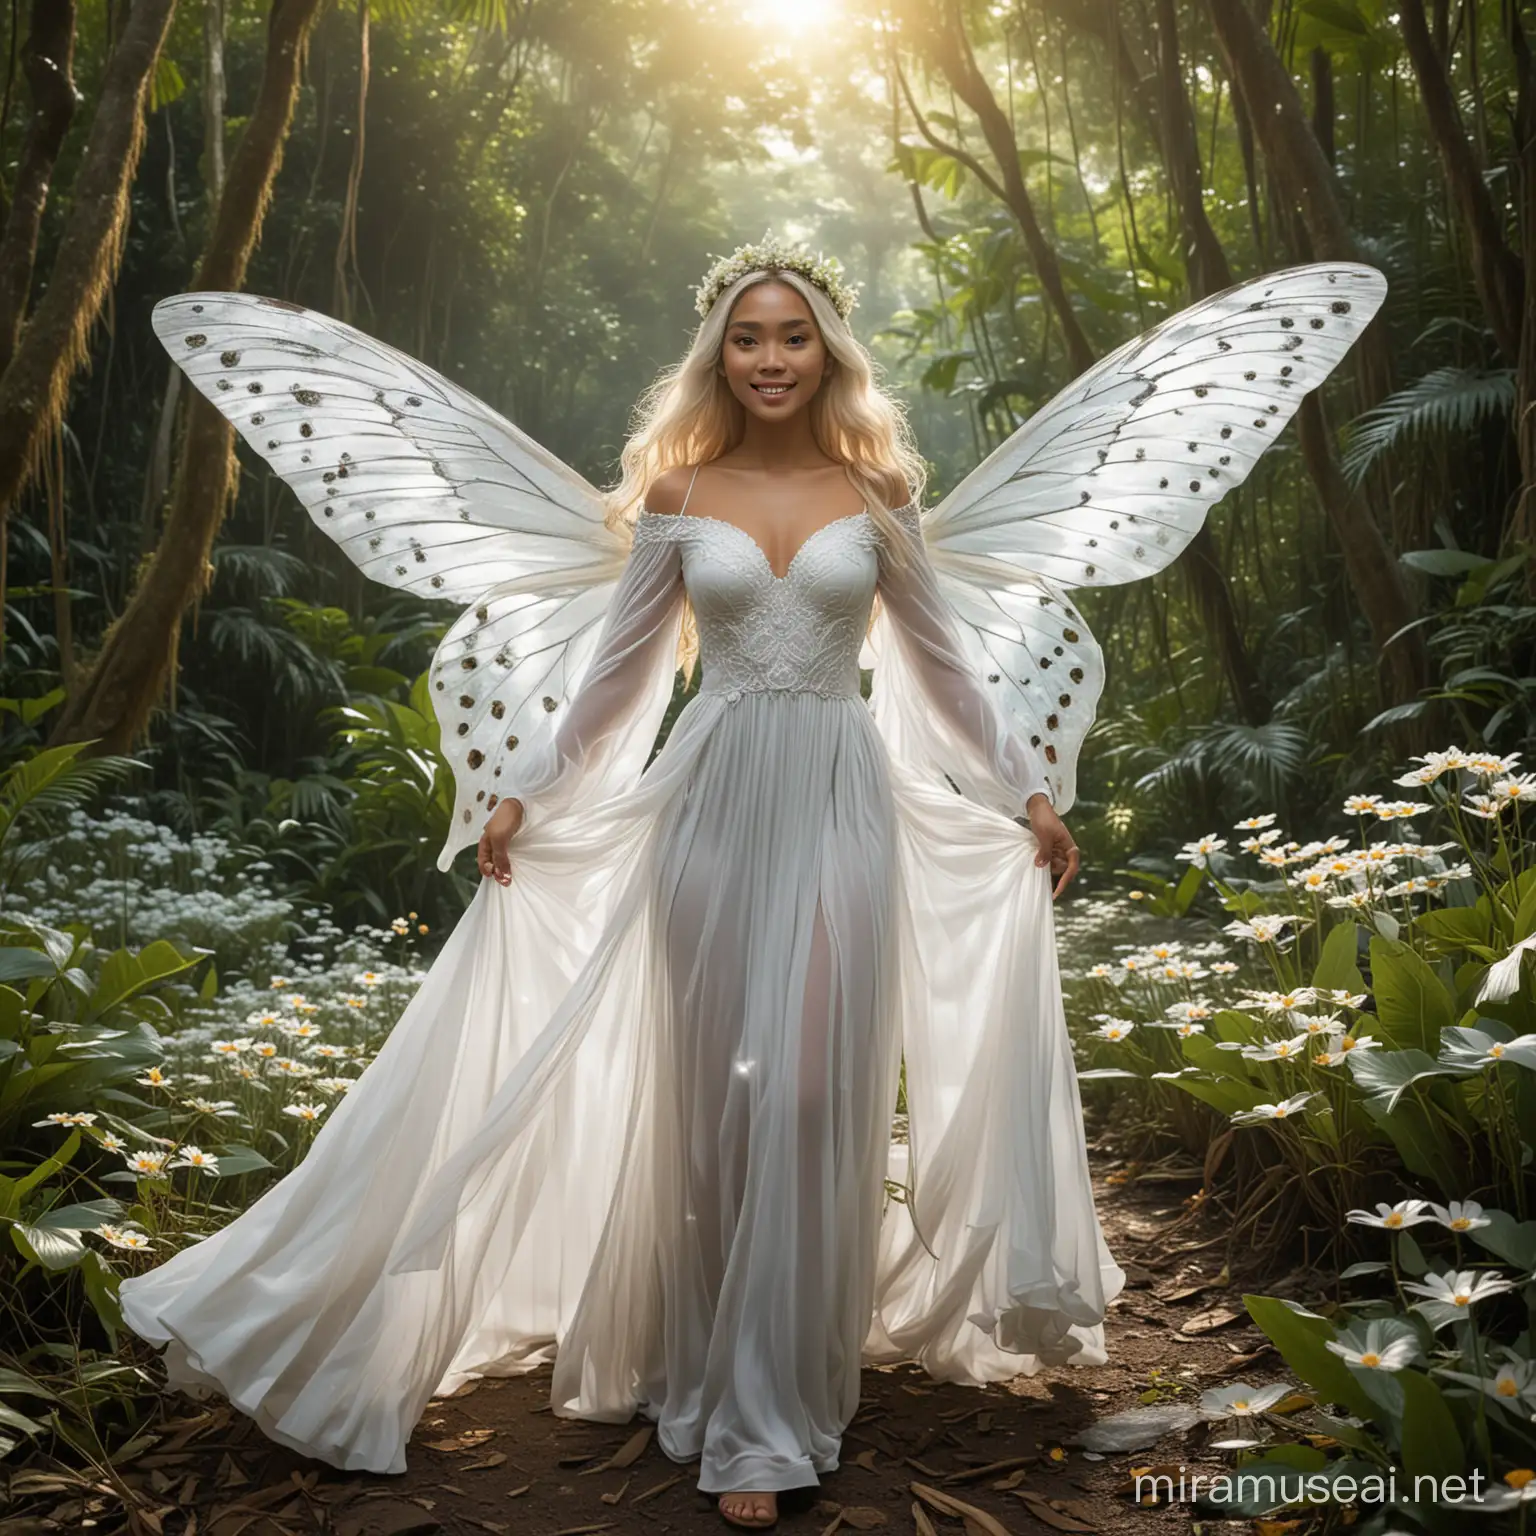 Filipino Nymph with Butterfly Wings in a Tropical Jungle